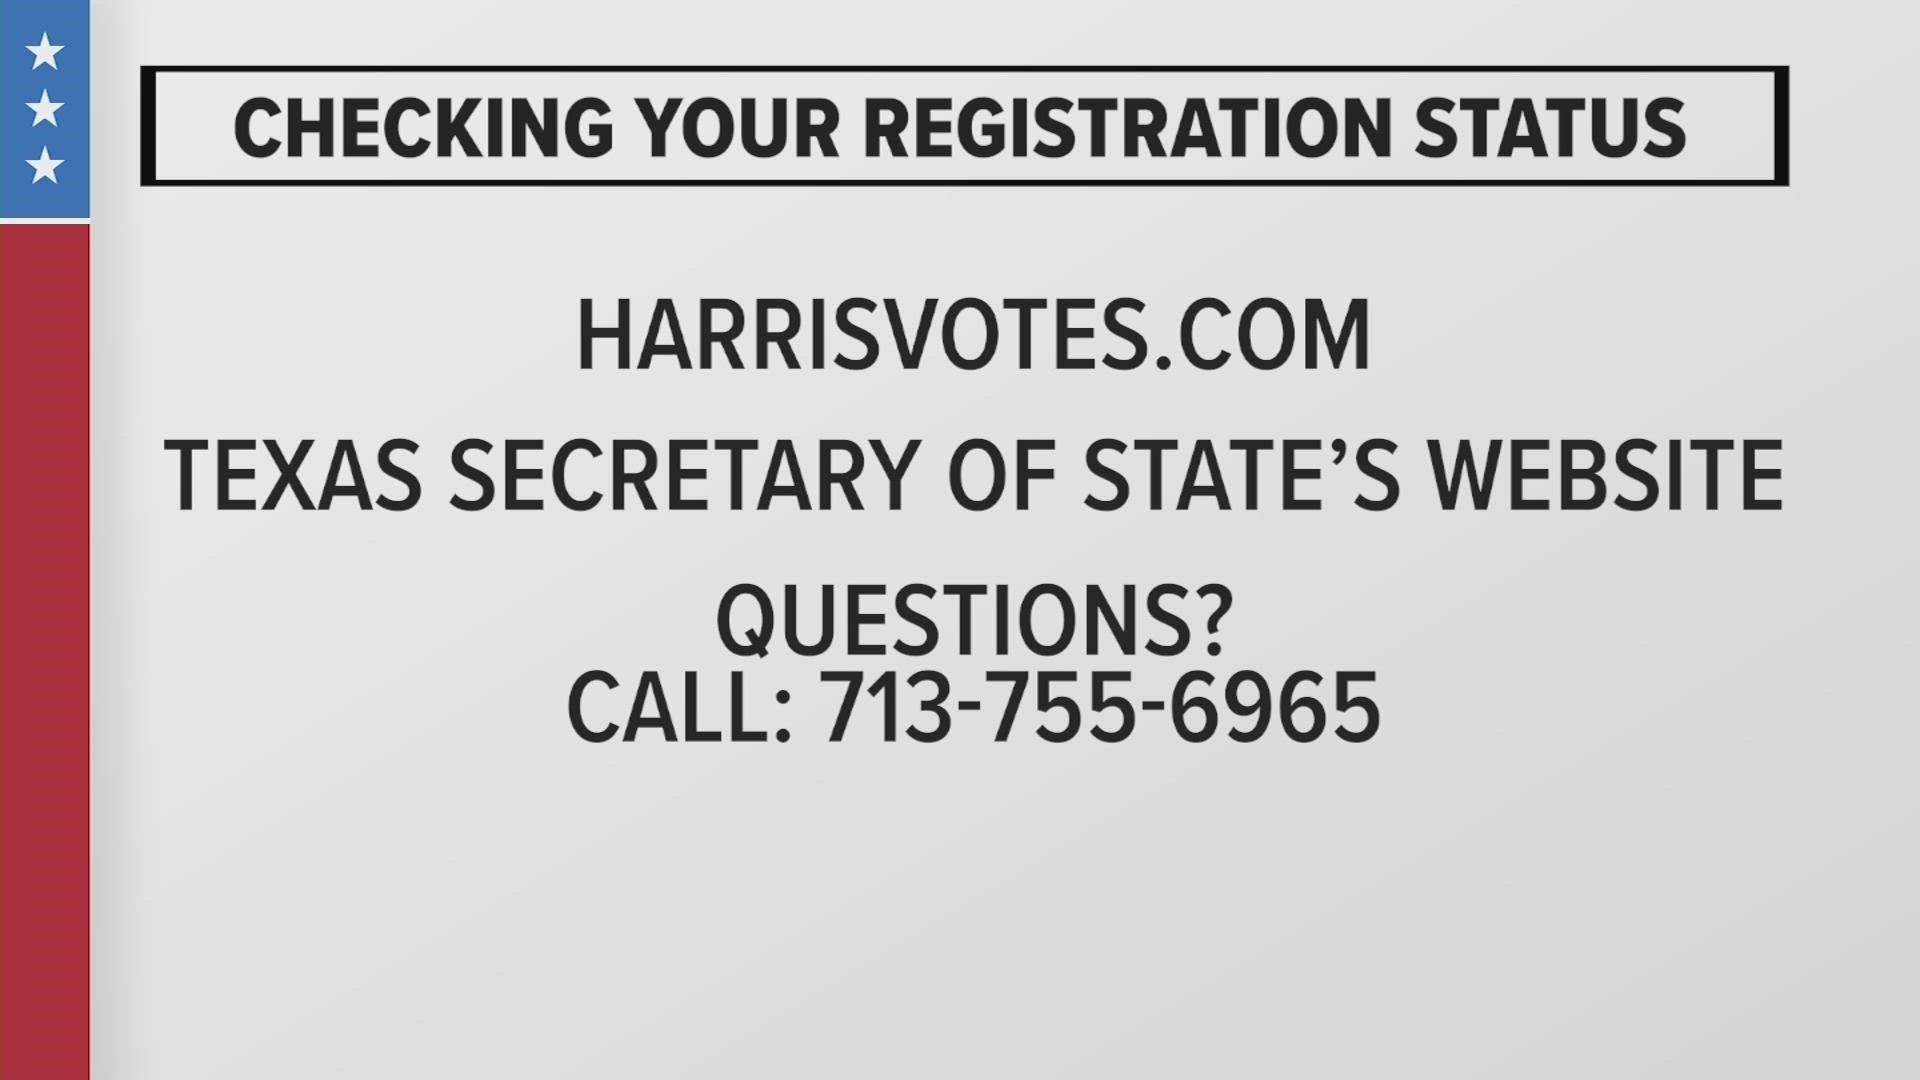 You can check your voter registration status at HarrisVotes.com or the Texas Secretary of State's website.